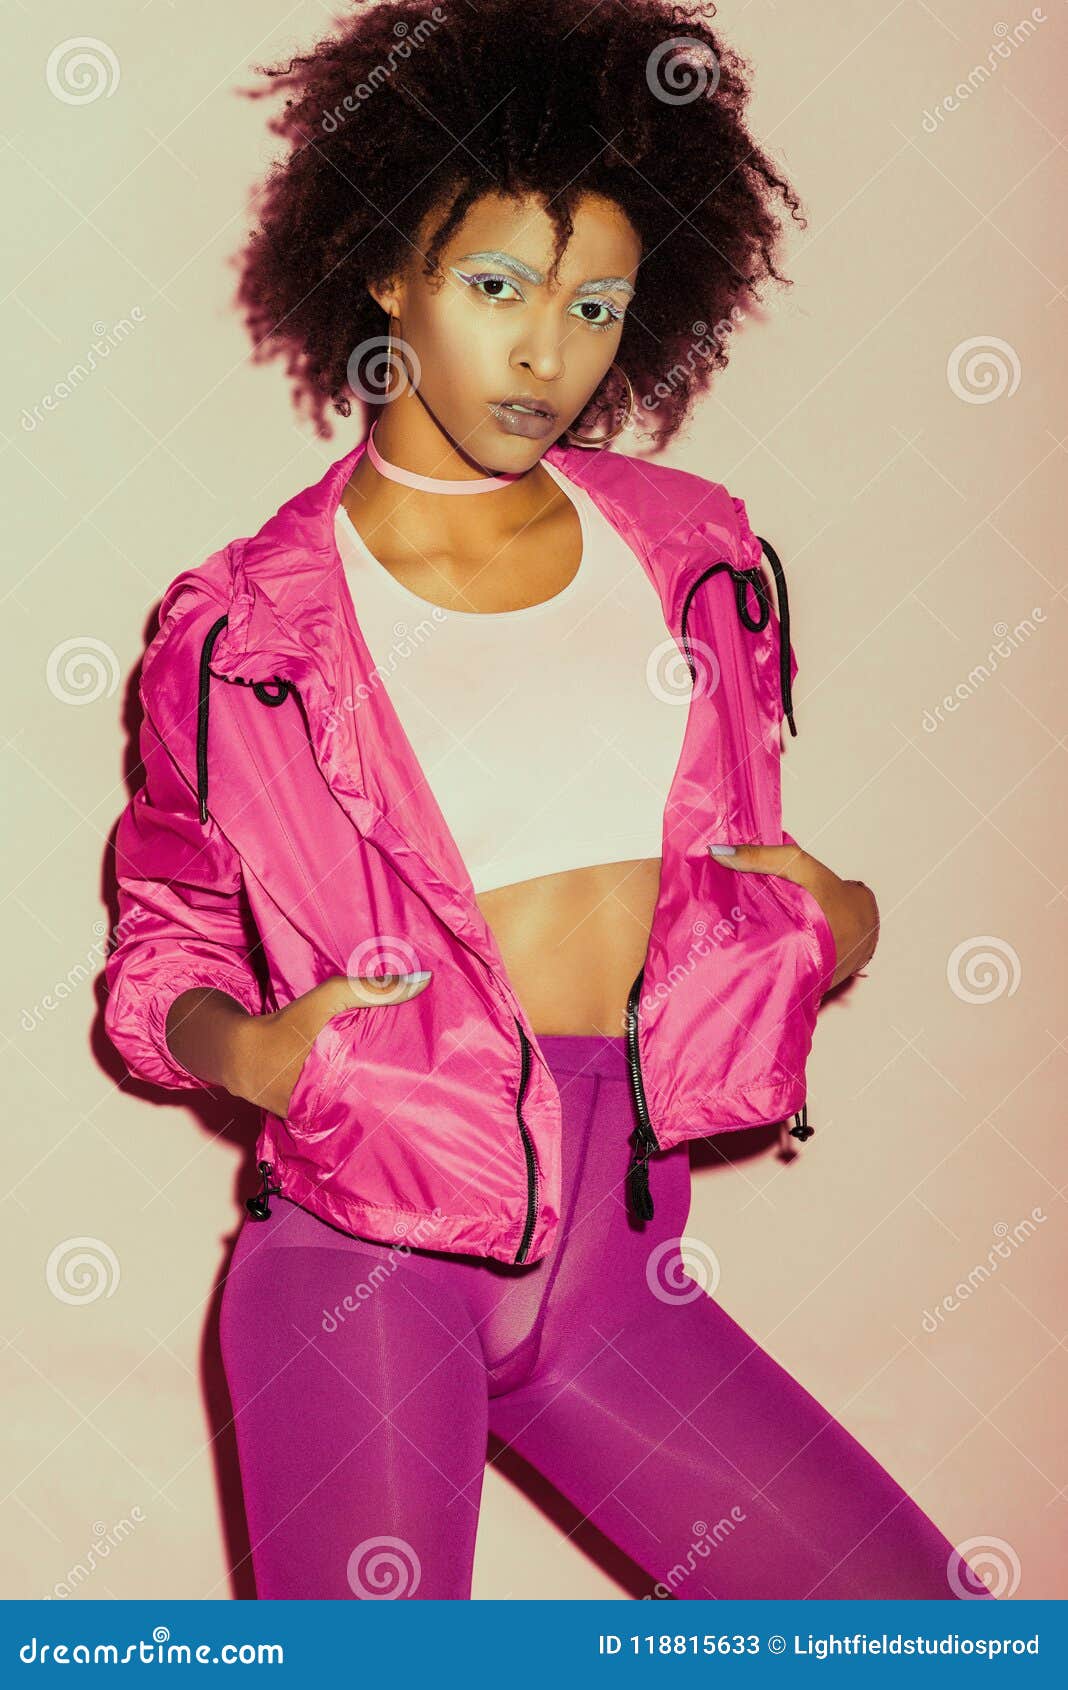 African American 80s Girl In Pink Clothes Posing Stock Image